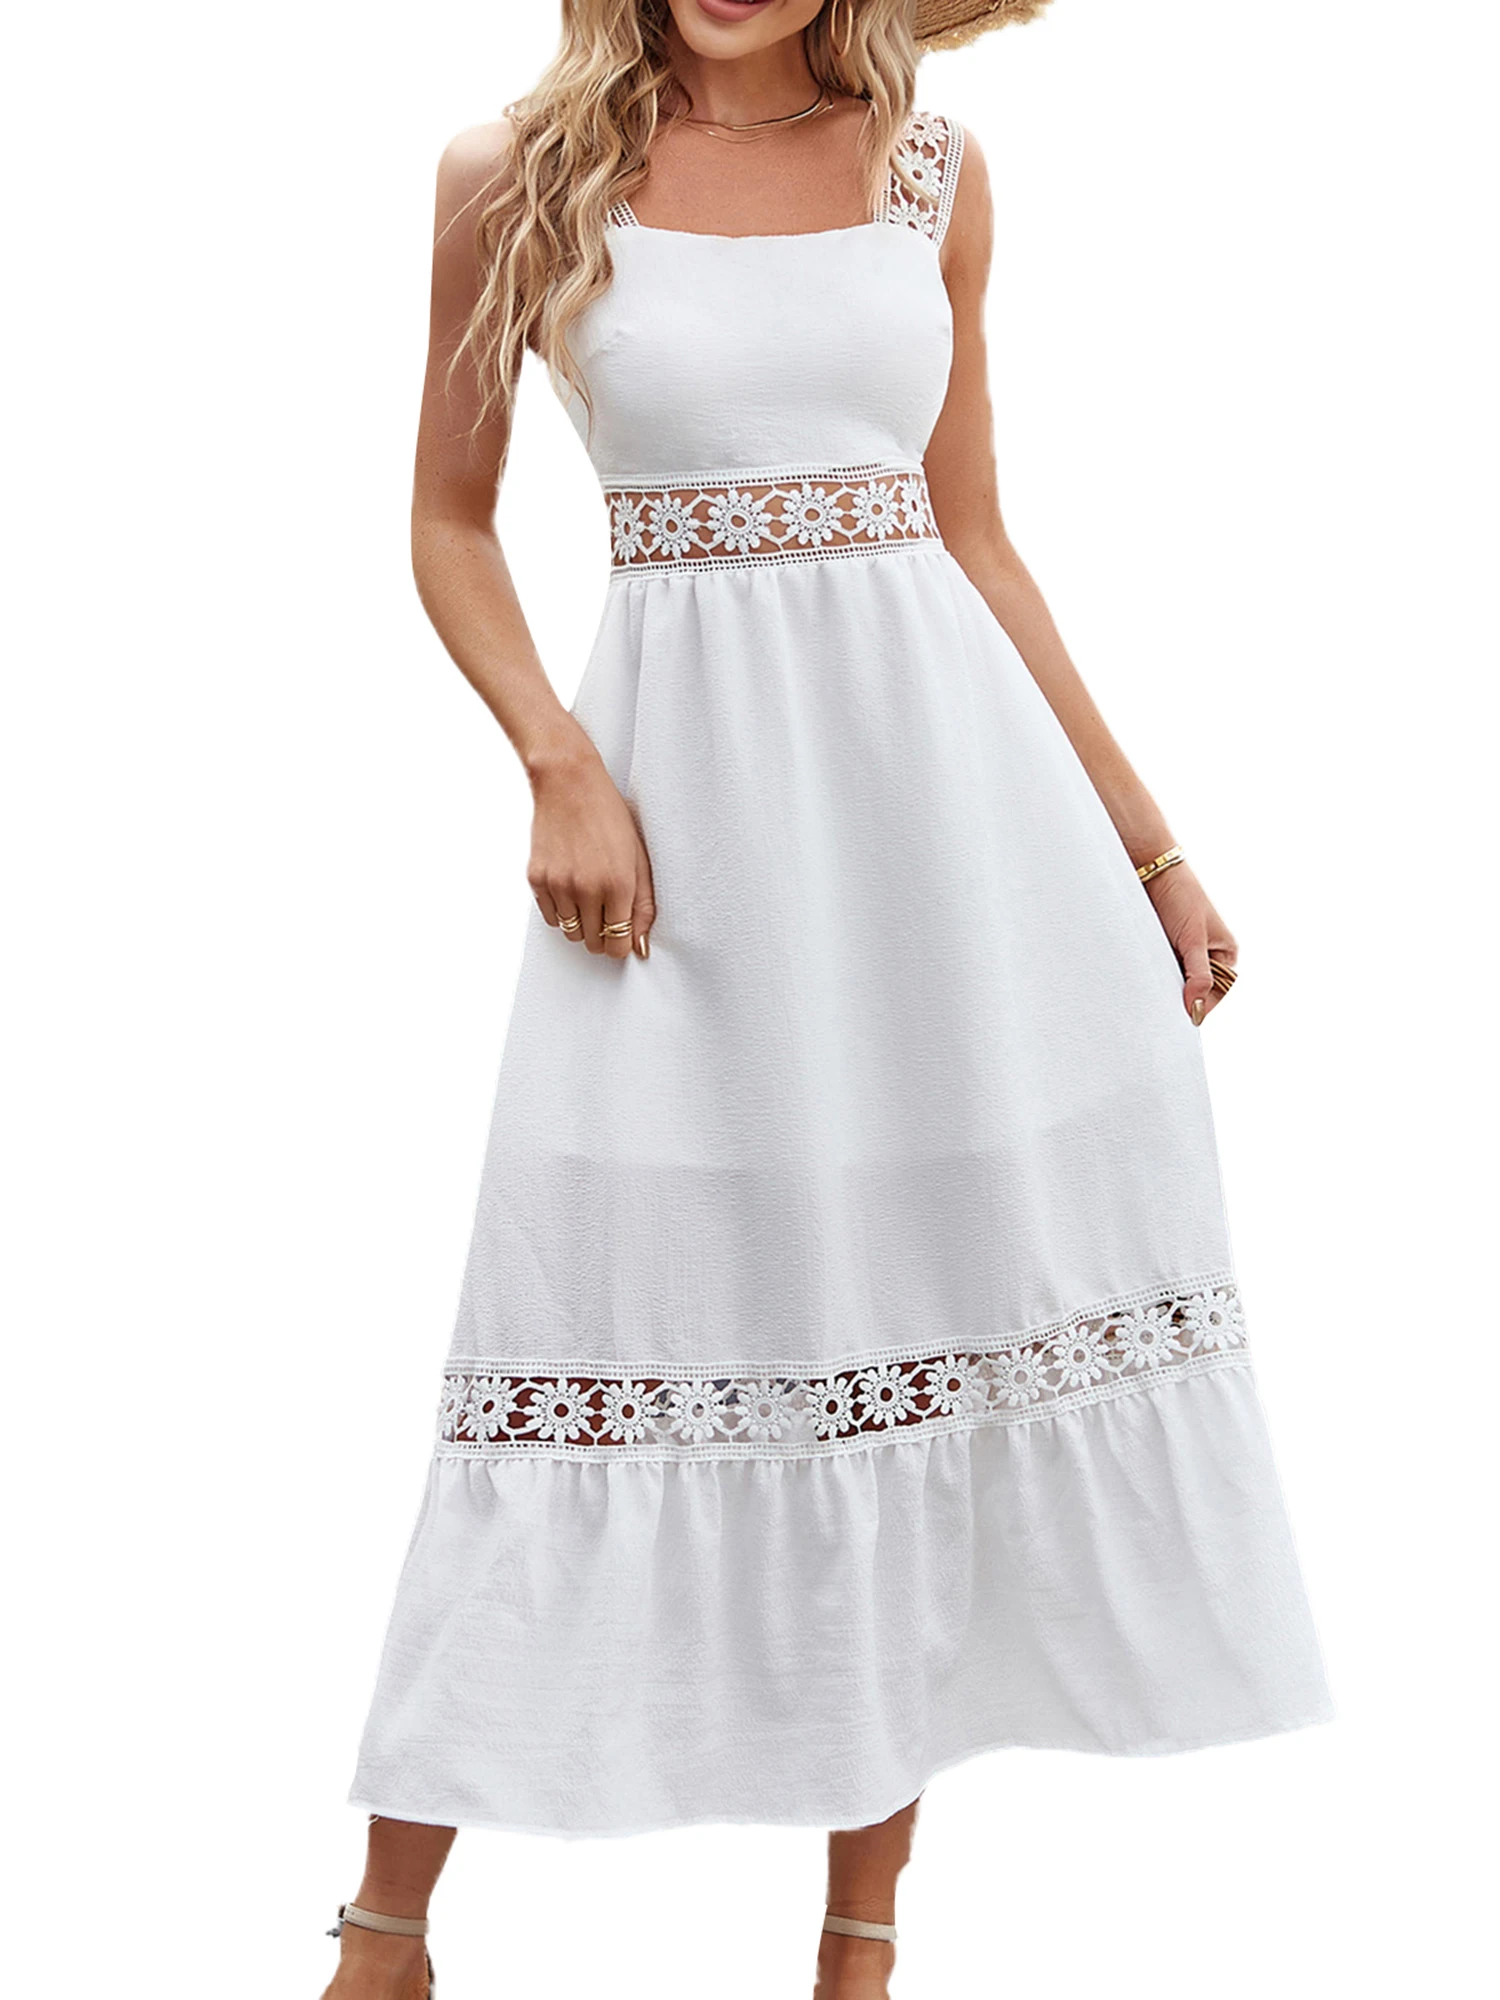 

Elegant Lace A-Line Dress with Cutout Details and Square Neckline - Perfect for Casual Parties Beach Clubs and Summer